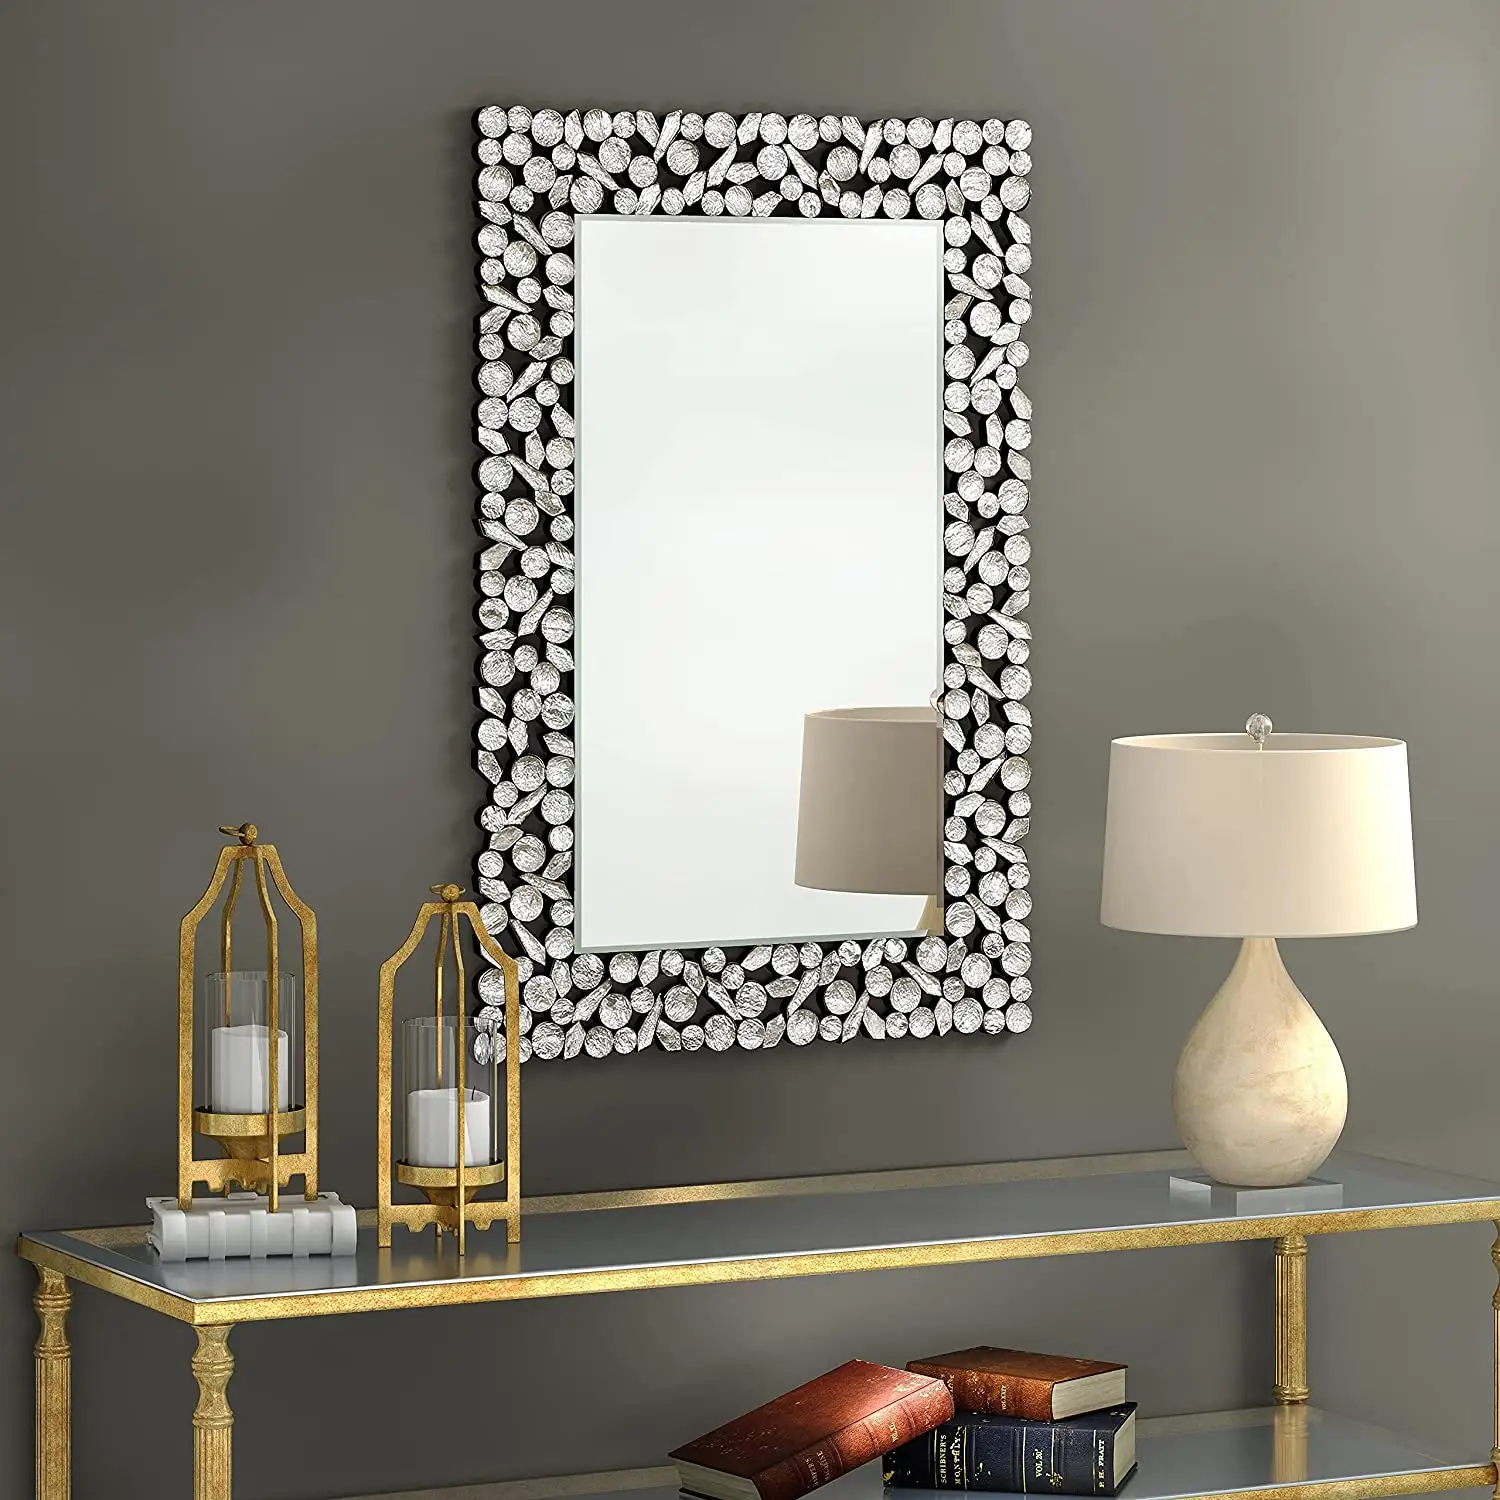 Rectangular Decorative Wall Mirror Silver Mosaic Accented Large Antique Venetian Wall Mirror for Entryways Living Room Bathroom